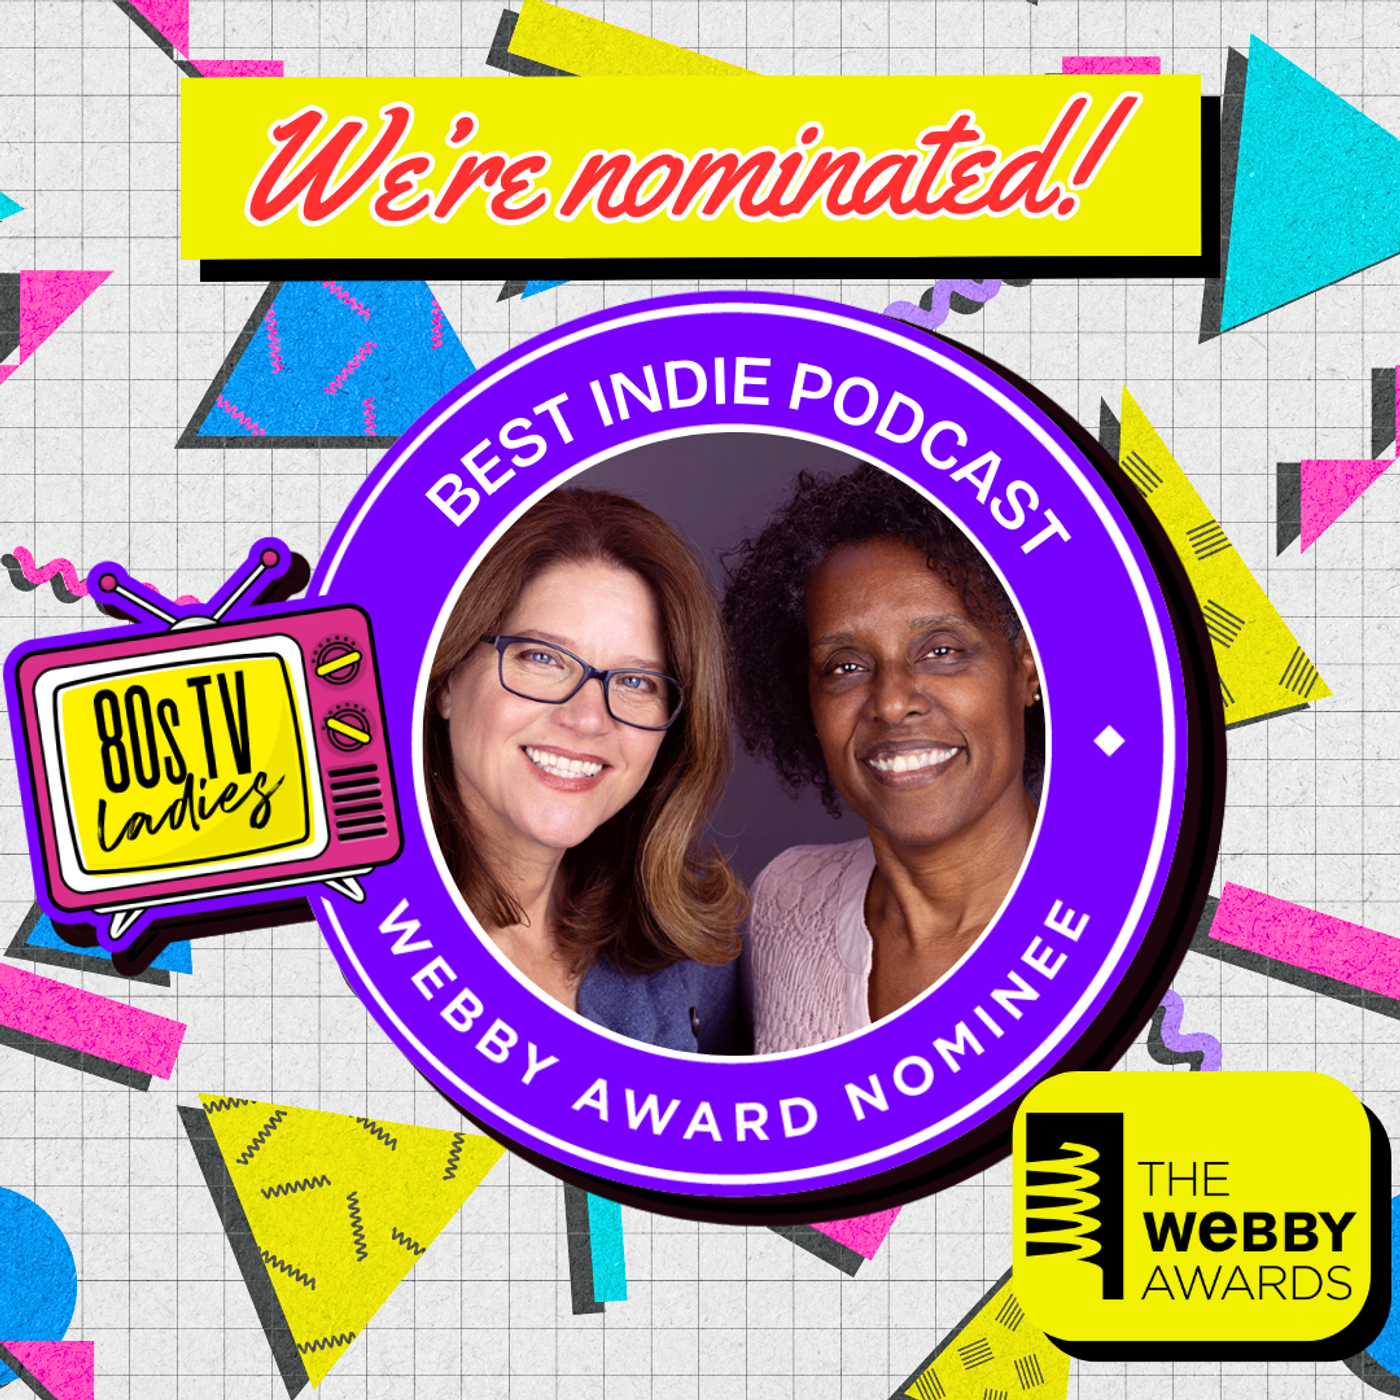 Vote 80’s TV Ladies for a Webby!